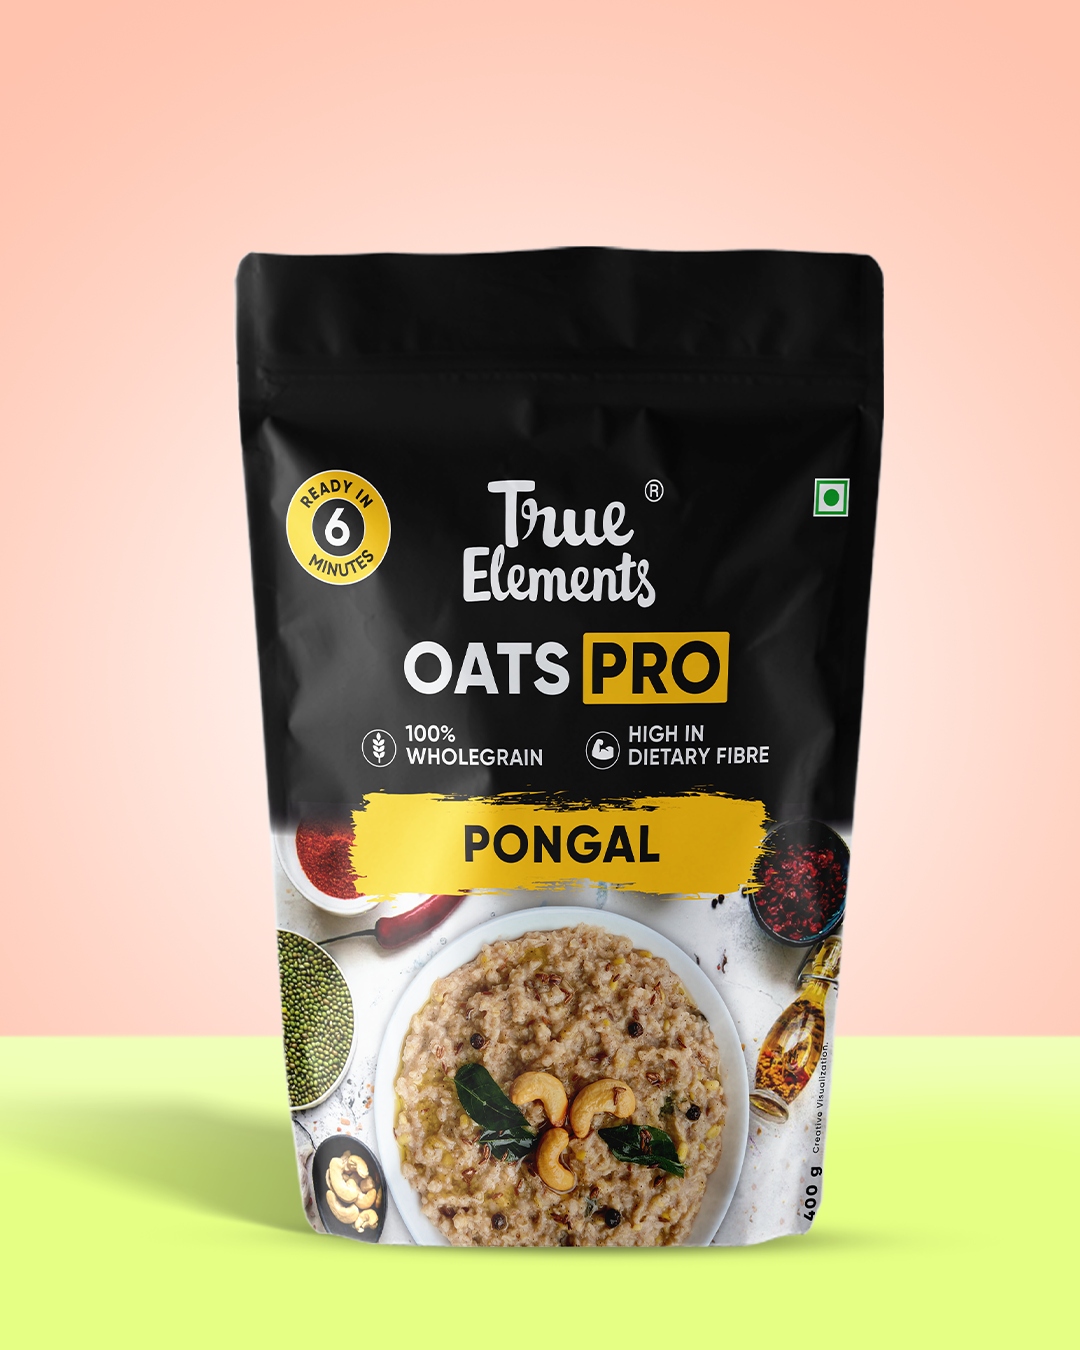 True Elements Oats Pro Pongal-Contains 12.5g Protein